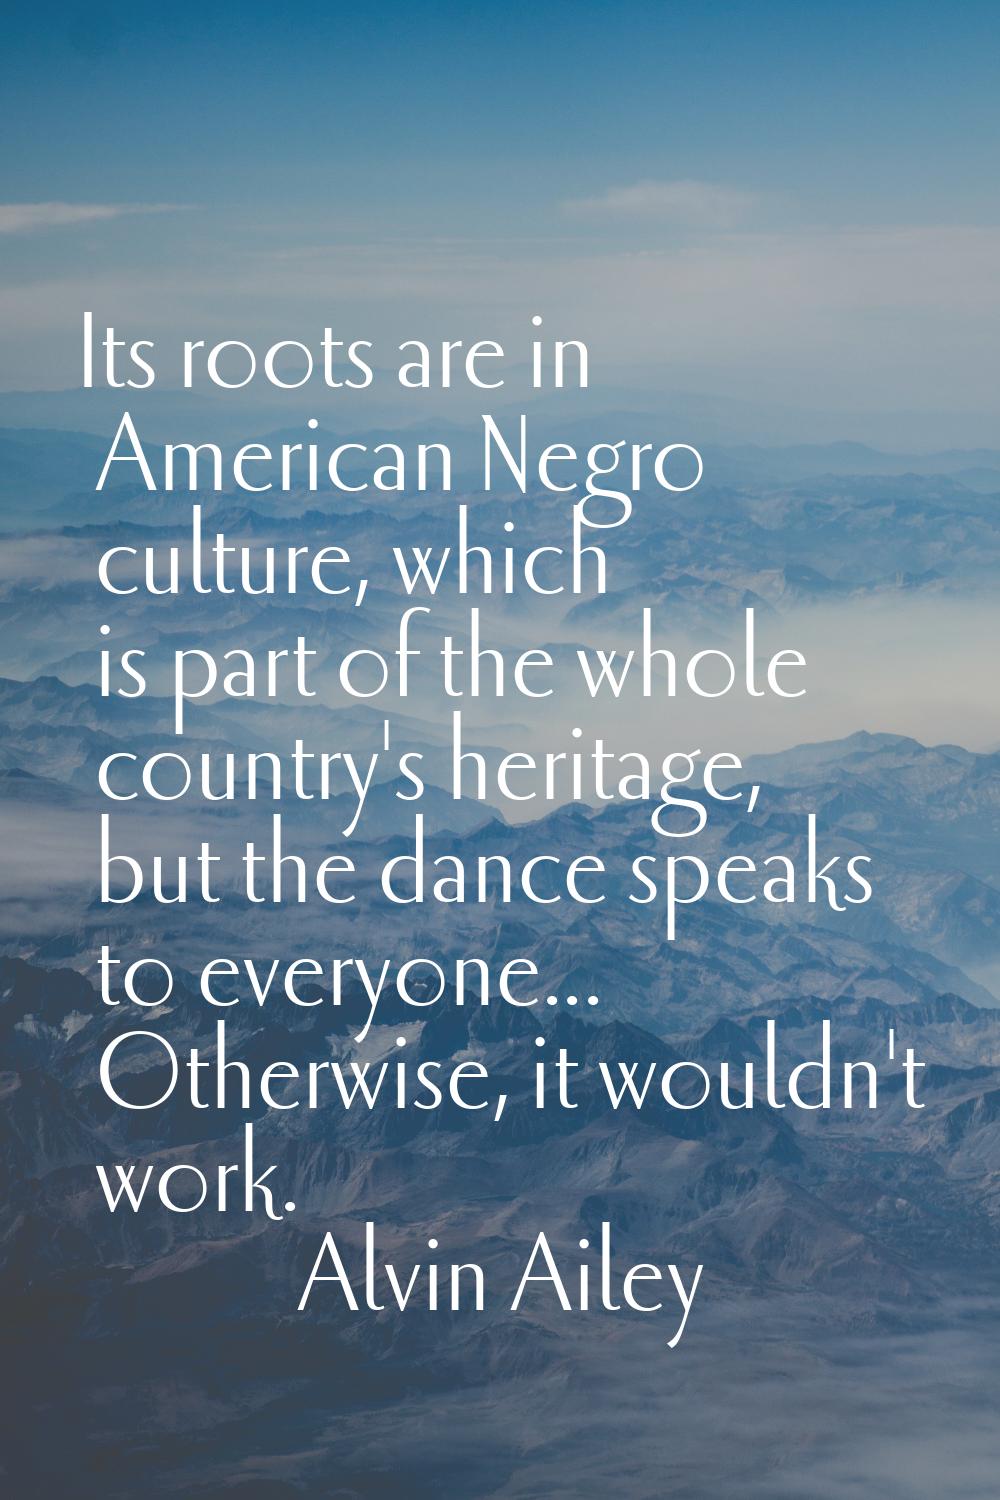 Its roots are in American Negro culture, which is part of the whole country's heritage, but the dan